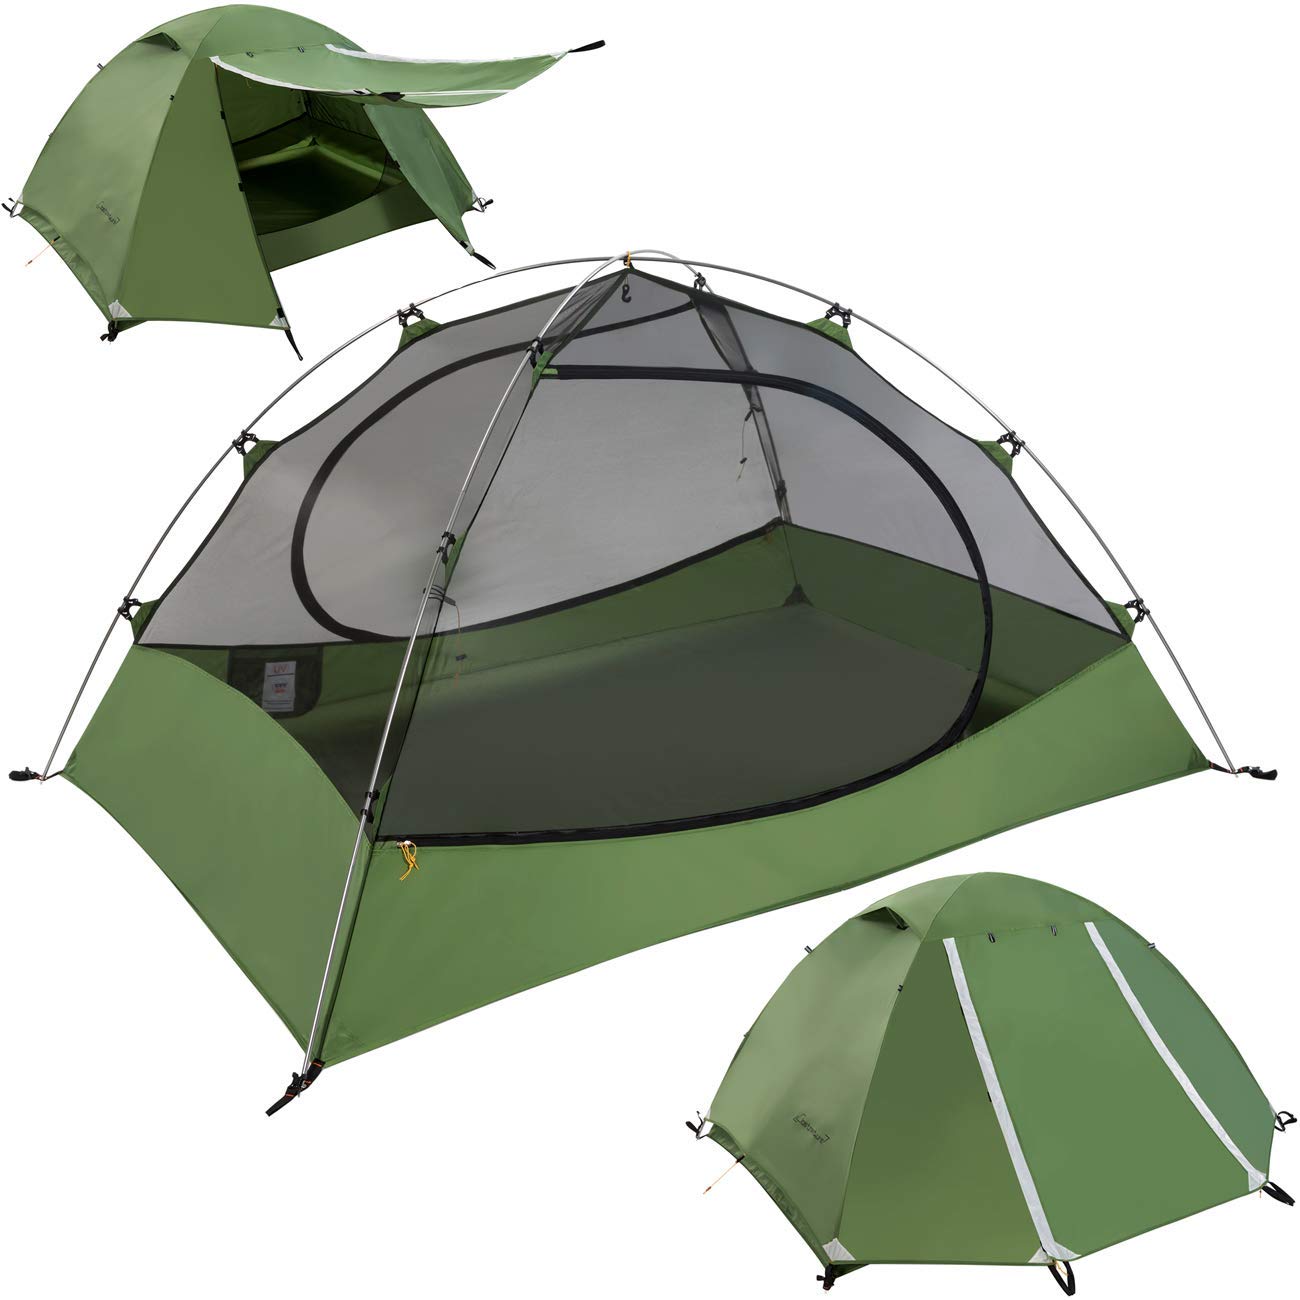 Gear Review - The Best Budget Backpacking Tents